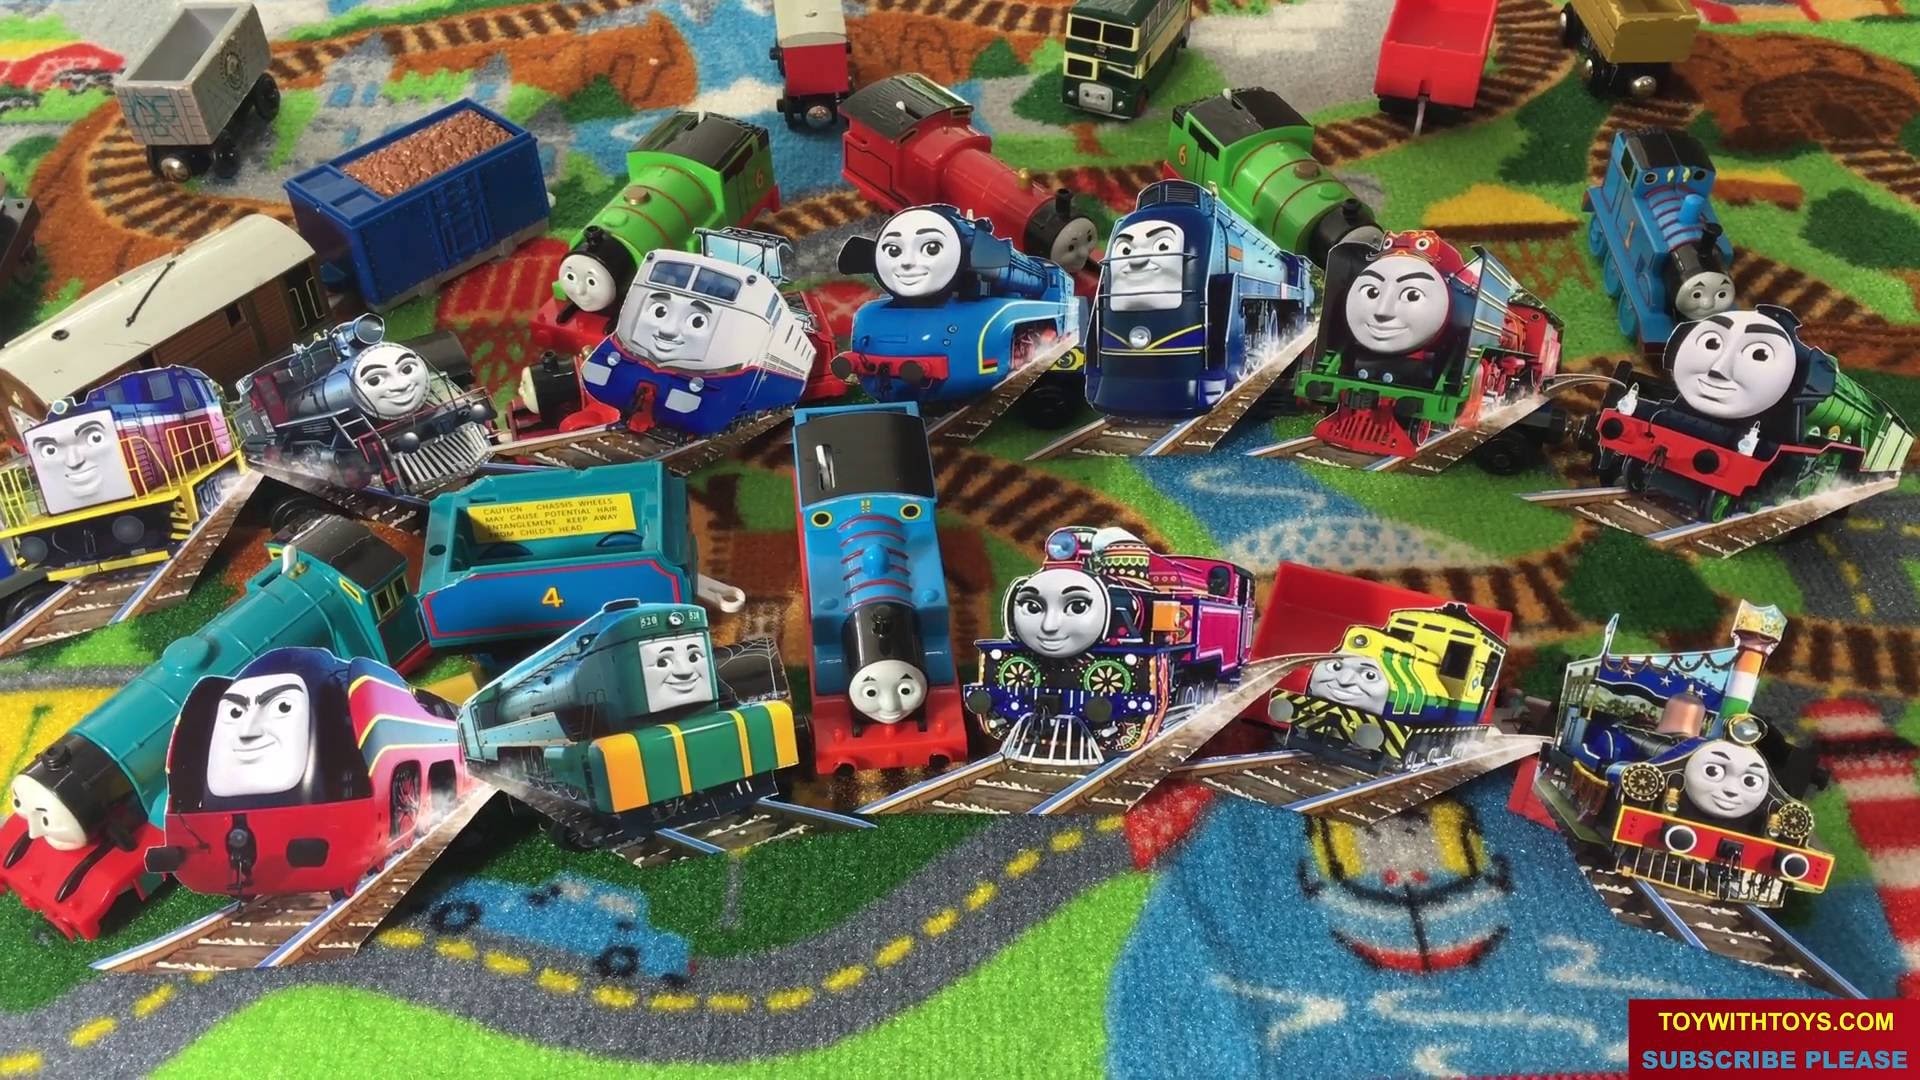 1920x1080 Thomas and Friends The Great Race Meet Rajiv, Raul of Brazil, Ashima of  India,Yong Bao of China - Thomas and Friends Youtube Channel. Thomas The  Train Toys